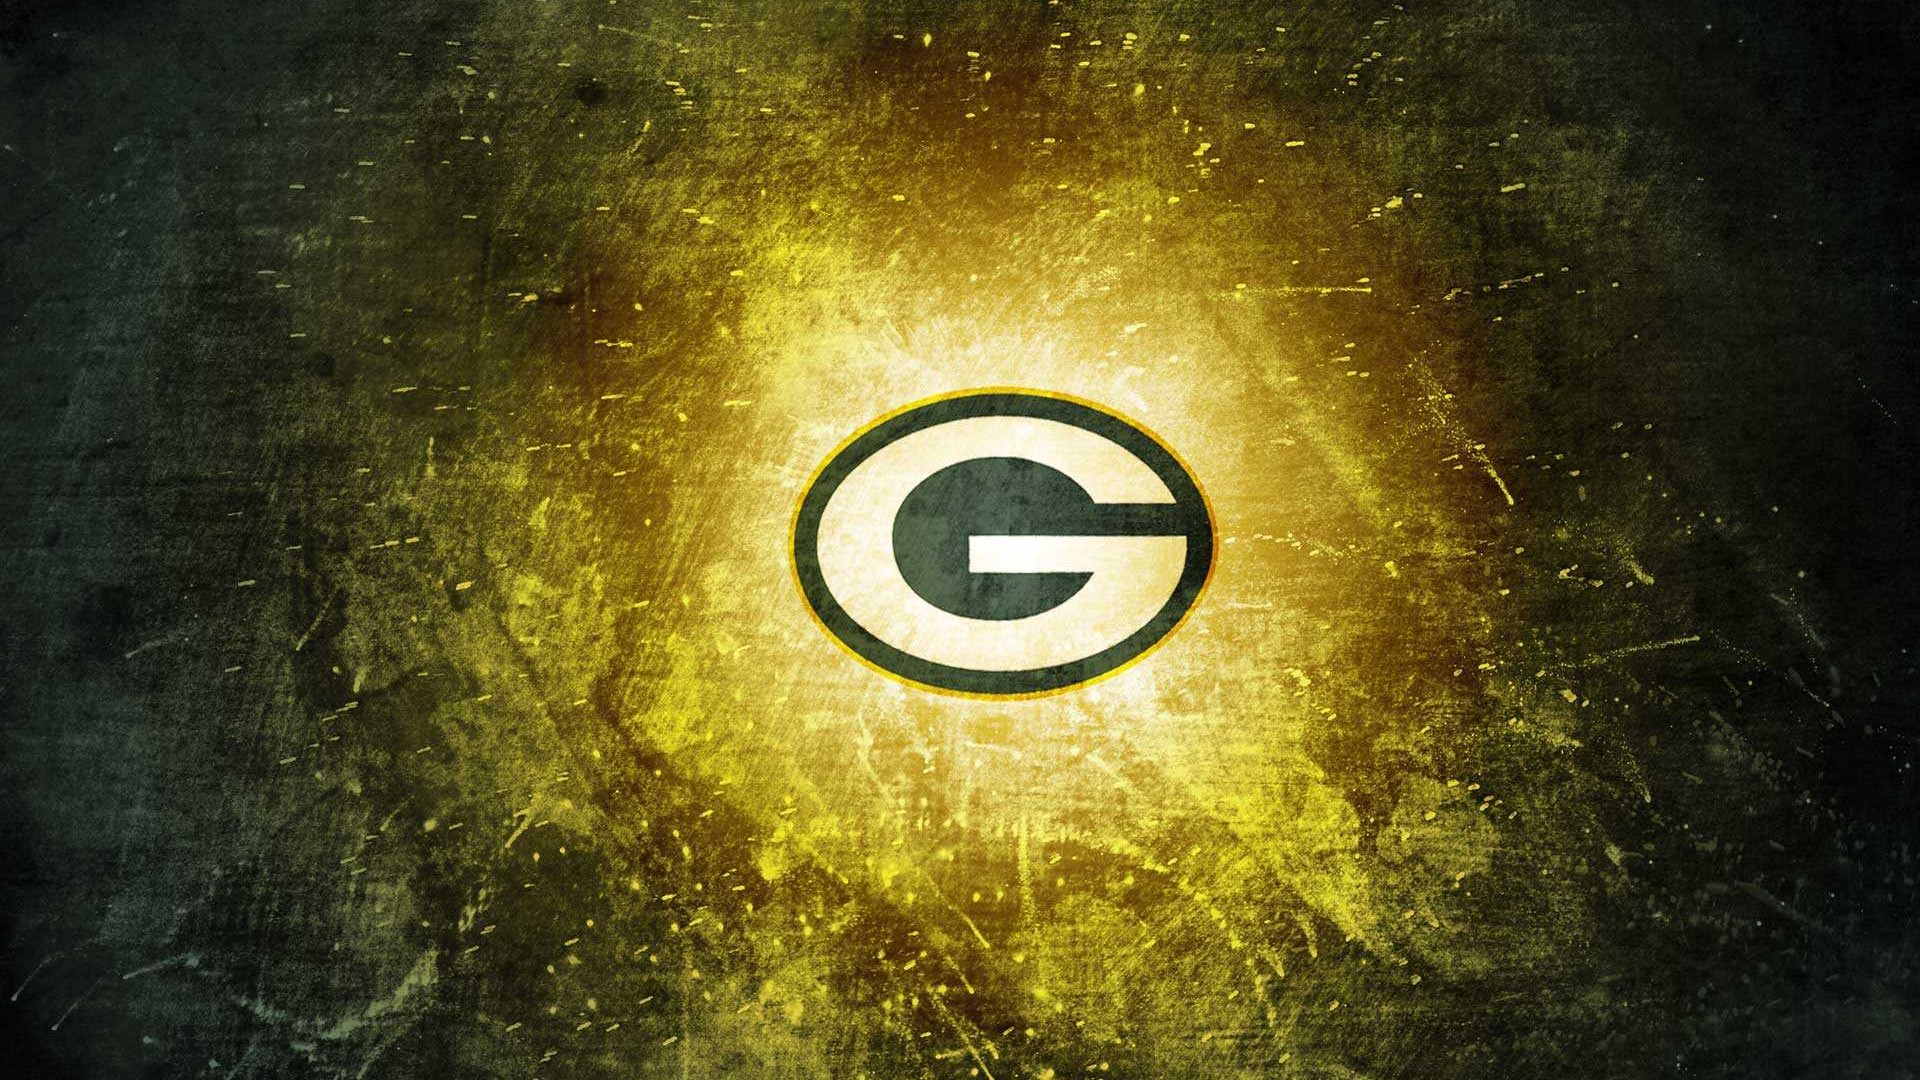 Green Bay Packers NFL Wallpaper HD 1920x1080 pixel. You can make this wallpaper for your Mac or Windows Desktop Background, iPhone, Android or Tablet and another Smartphone device